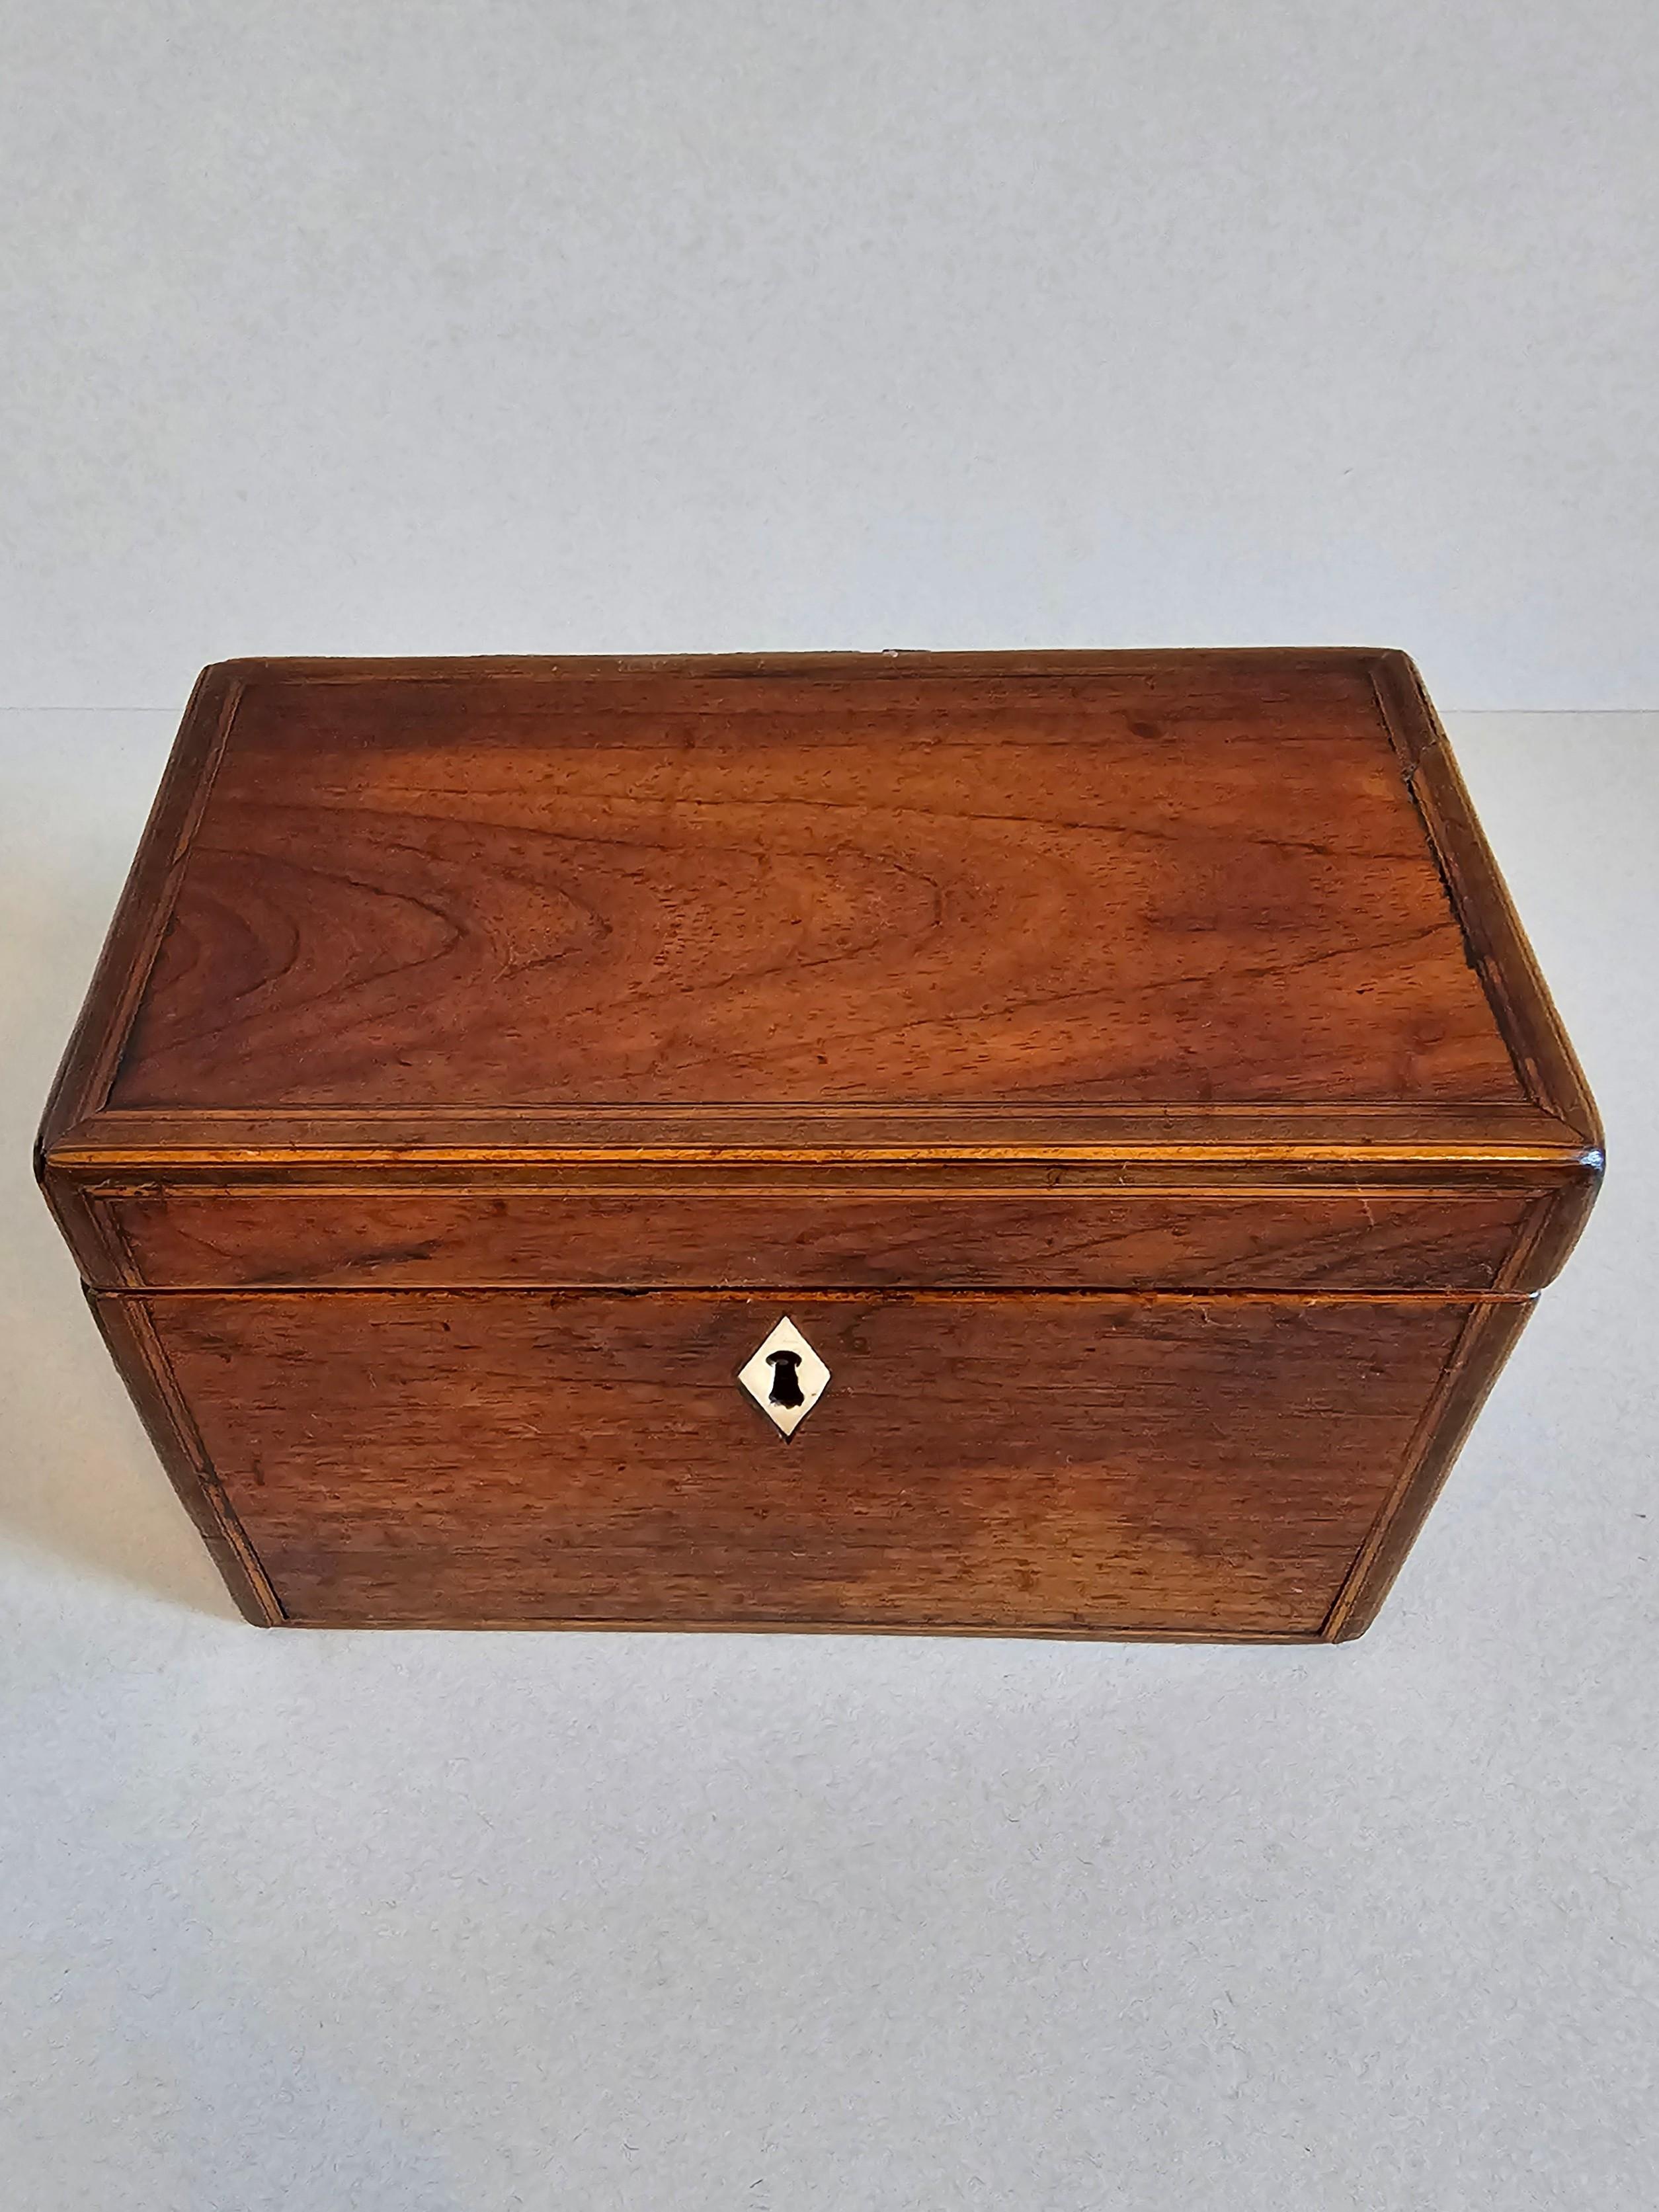 Antique English Georgian Period Mahogany Tea Caddy circa 1800 In Good Condition For Sale In Forney, TX